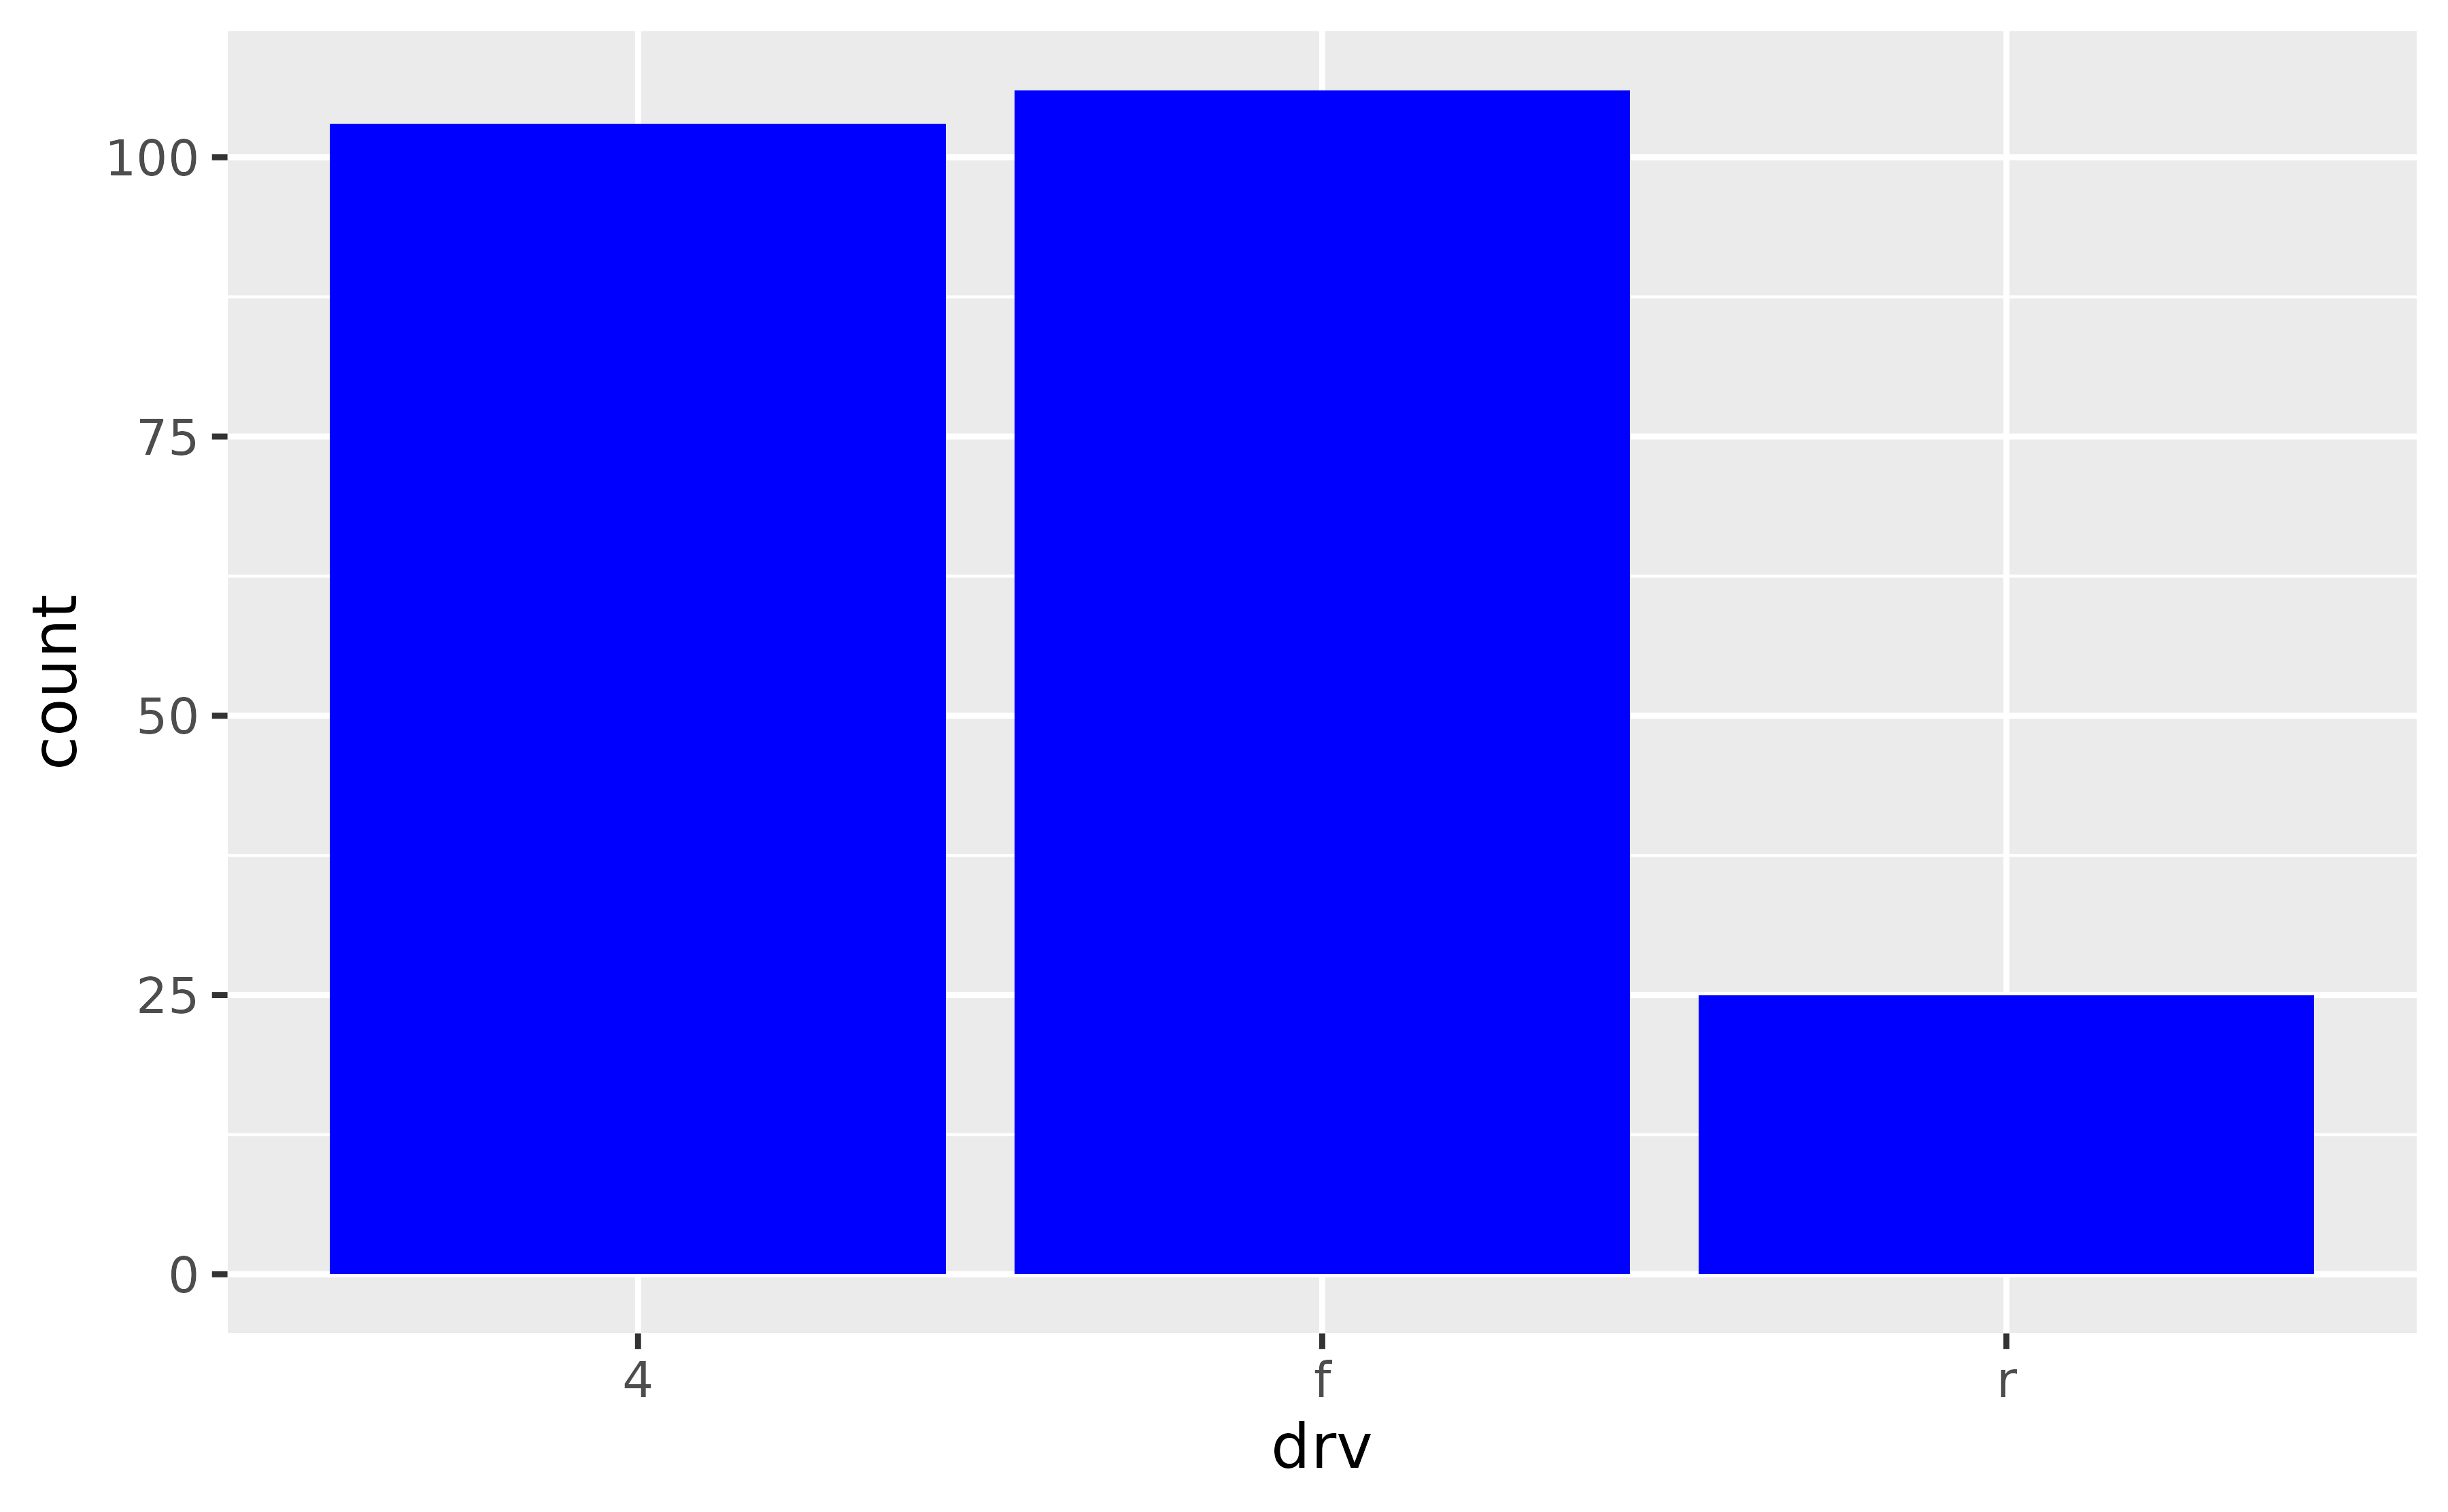 A bar chart showing the number of cars for each of three types
 of drive train. All bars are blue.